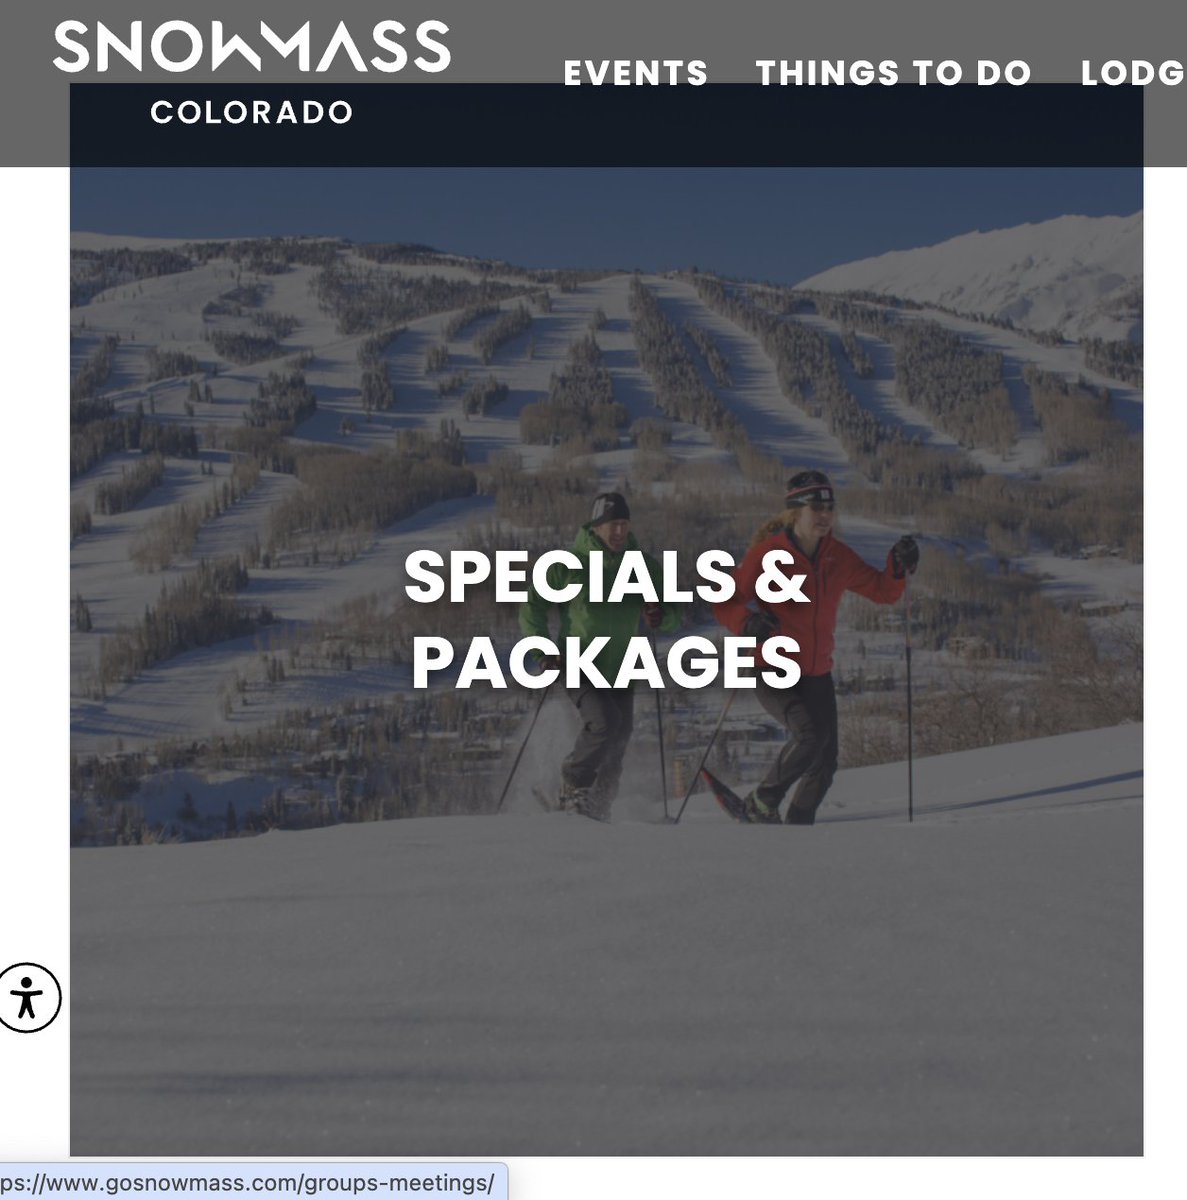 Have you ever looked at marketing materials from seven years ago and think 'I really wish they would hire me again.' @Snowmass @AspenSnowmass